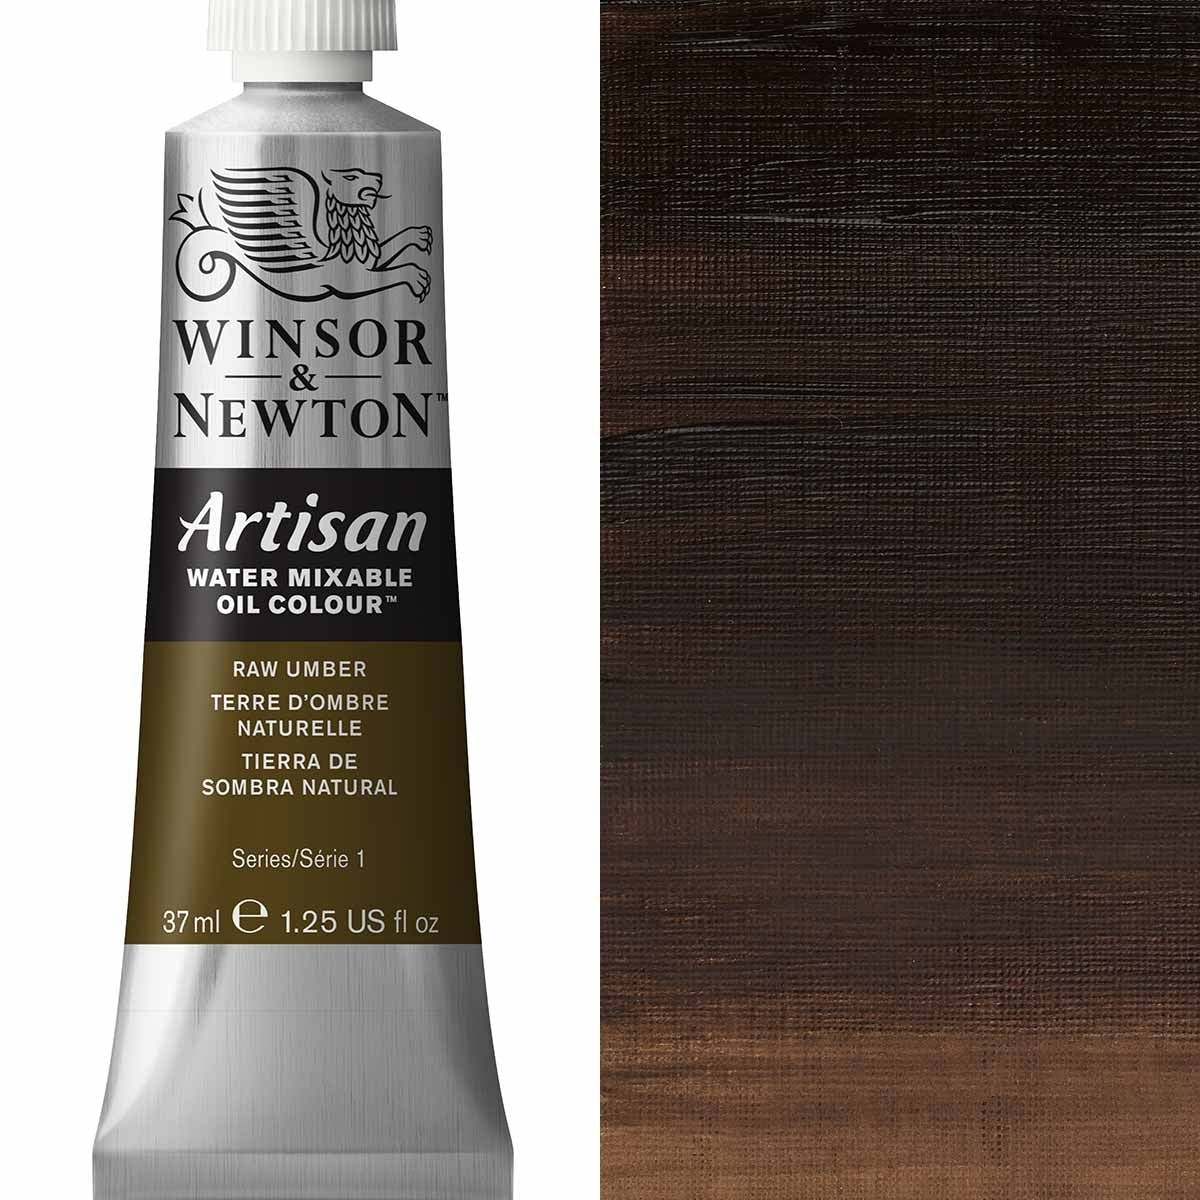 Winsor and Newton - Artisan Oil Colour Watermixable - 37ml - Raw Umber